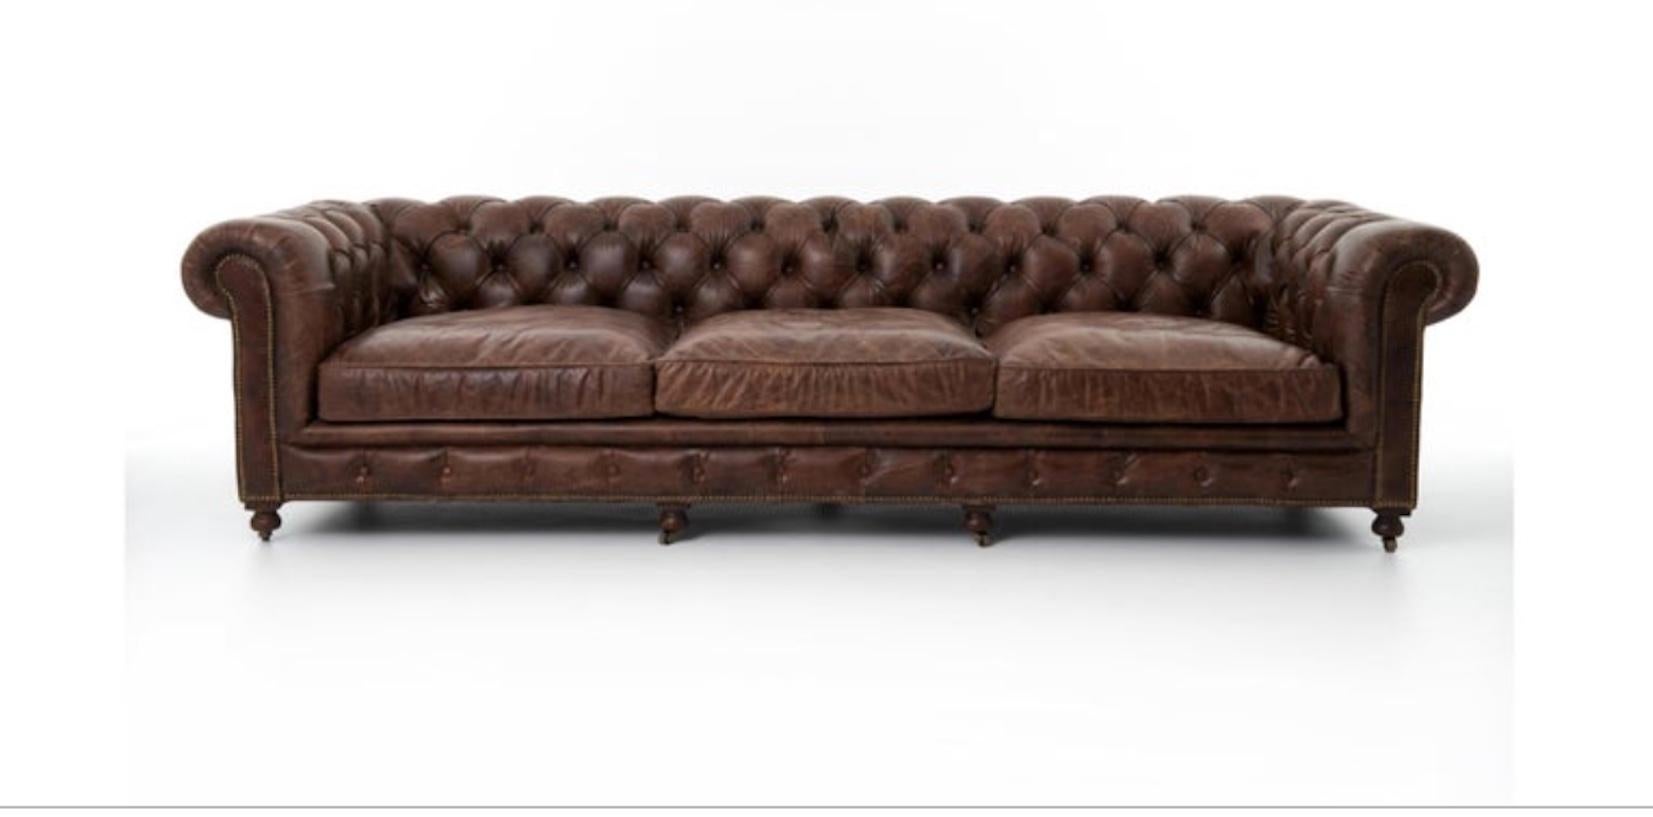 One Pair English Style Leather Chesterfield, Great Color with a Hand Applied Pat For Sale 4